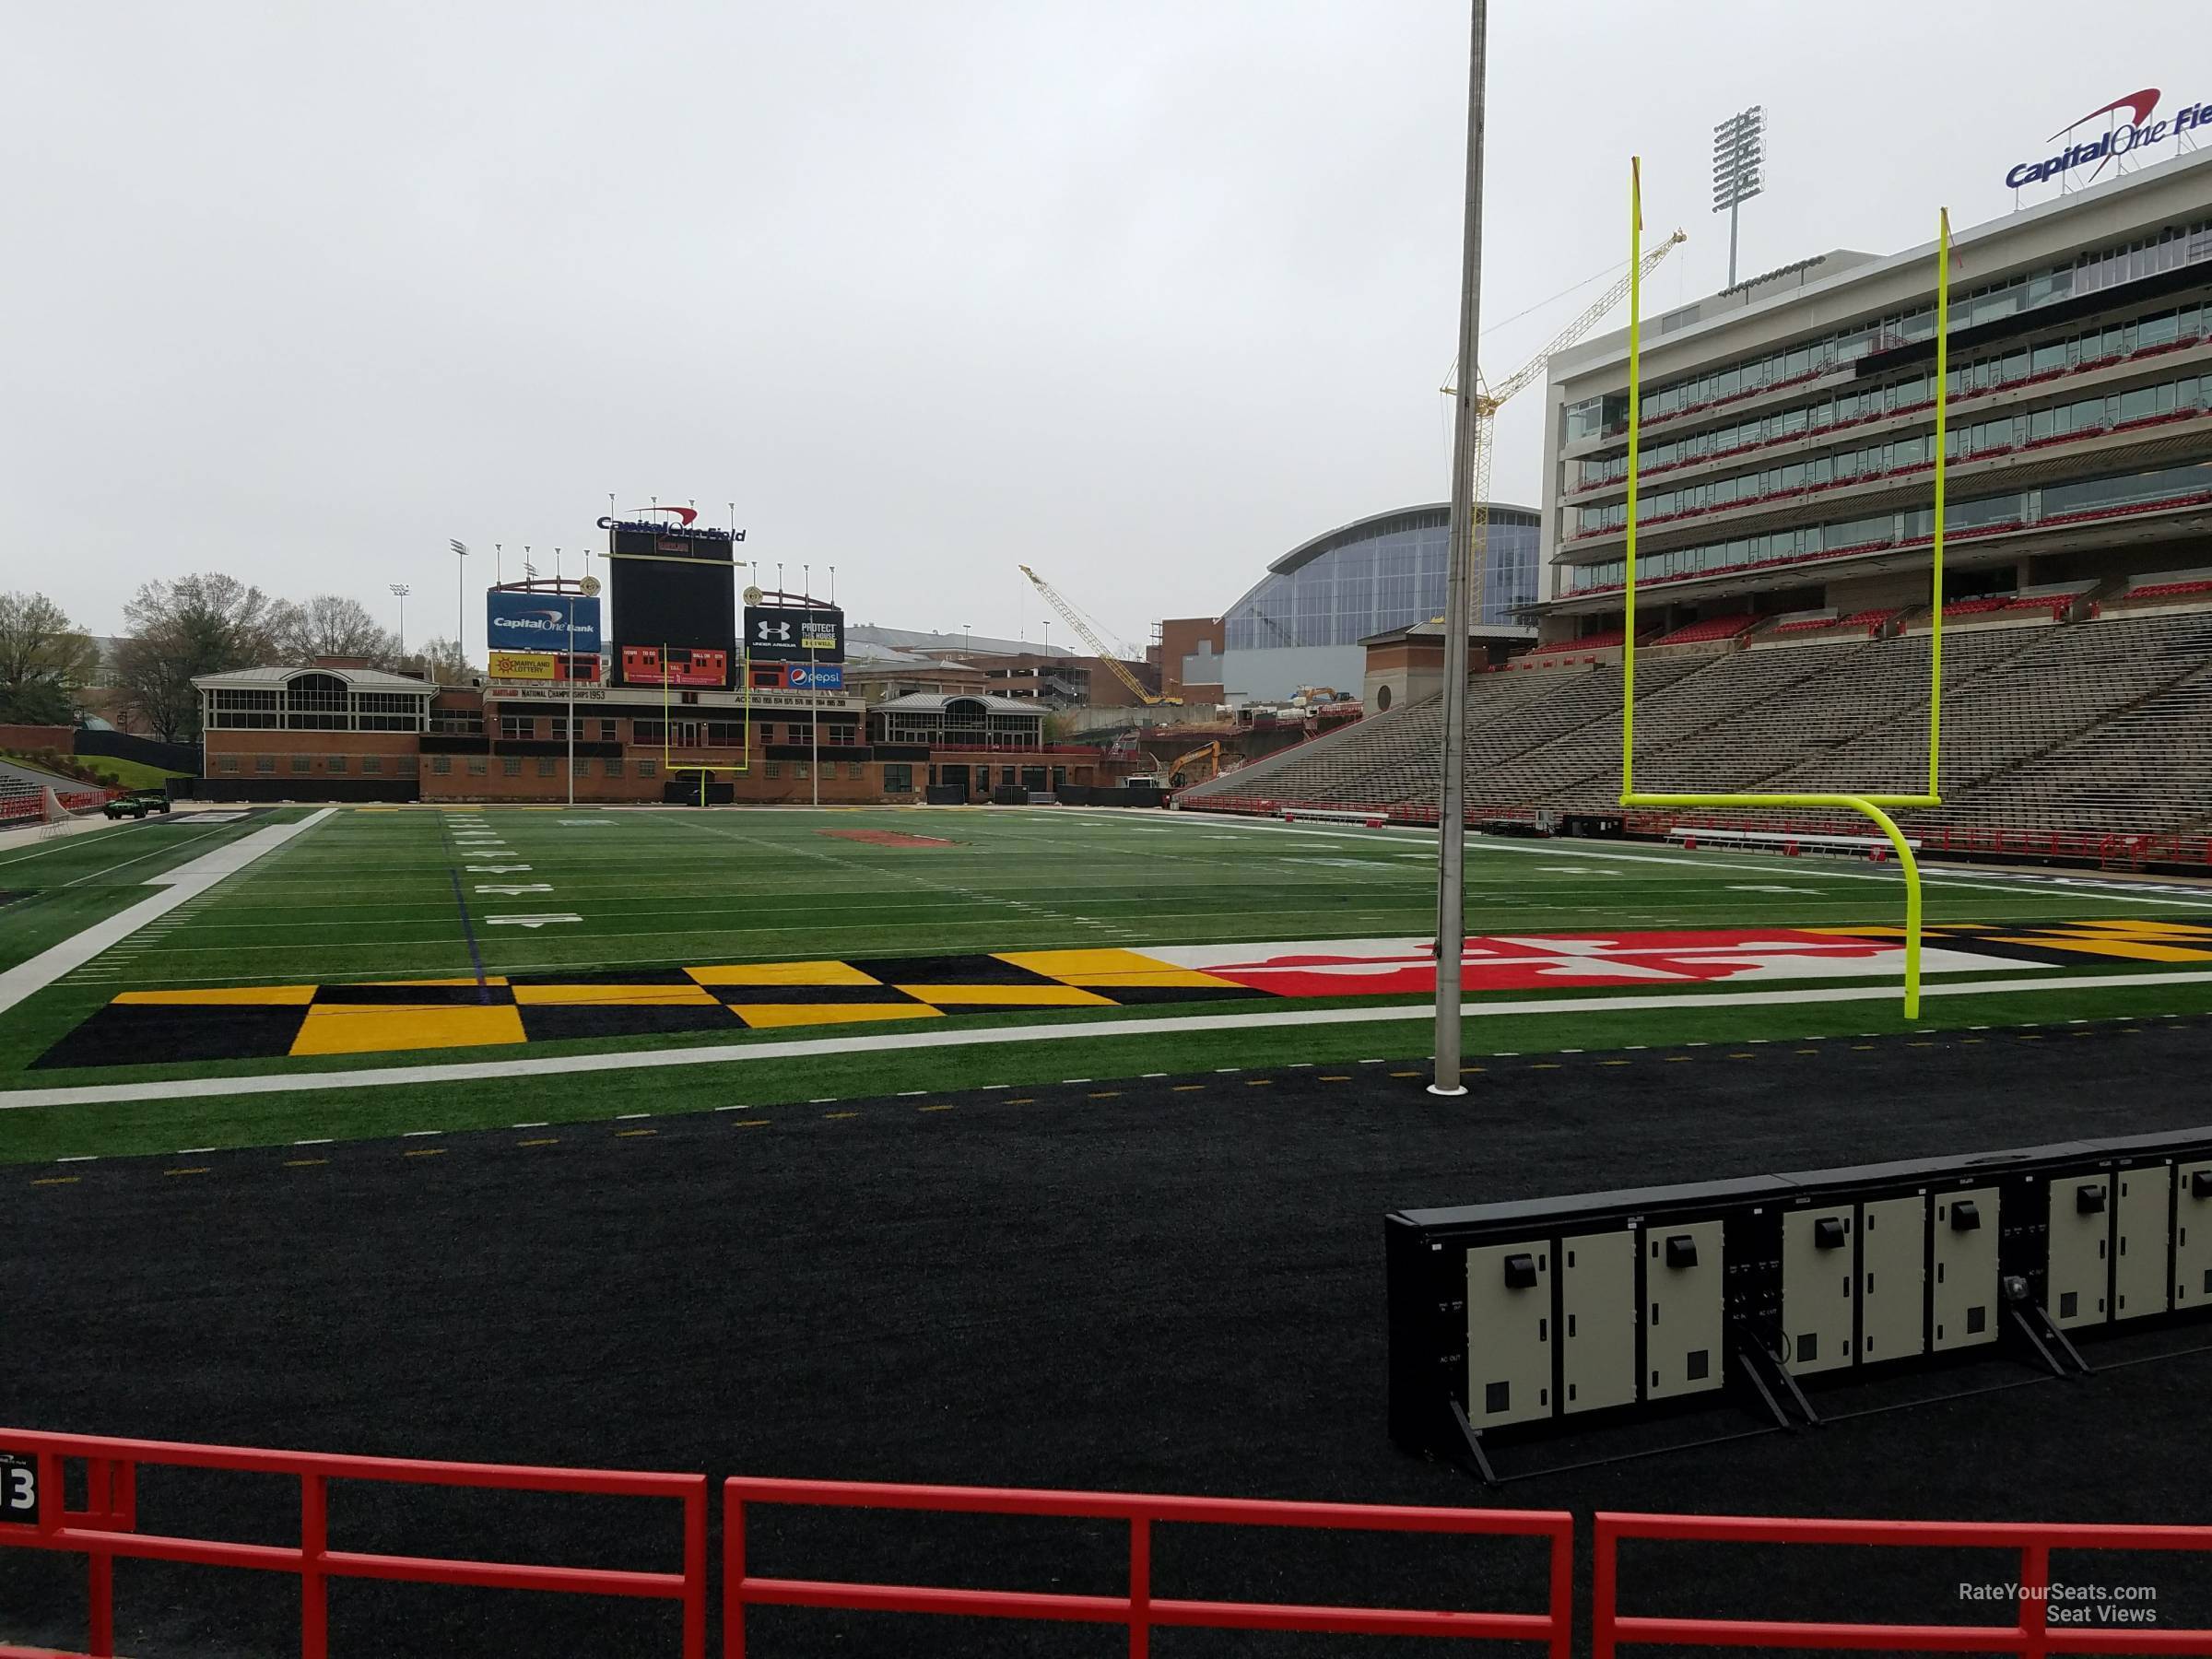 section 13, row g seat view  - maryland stadium